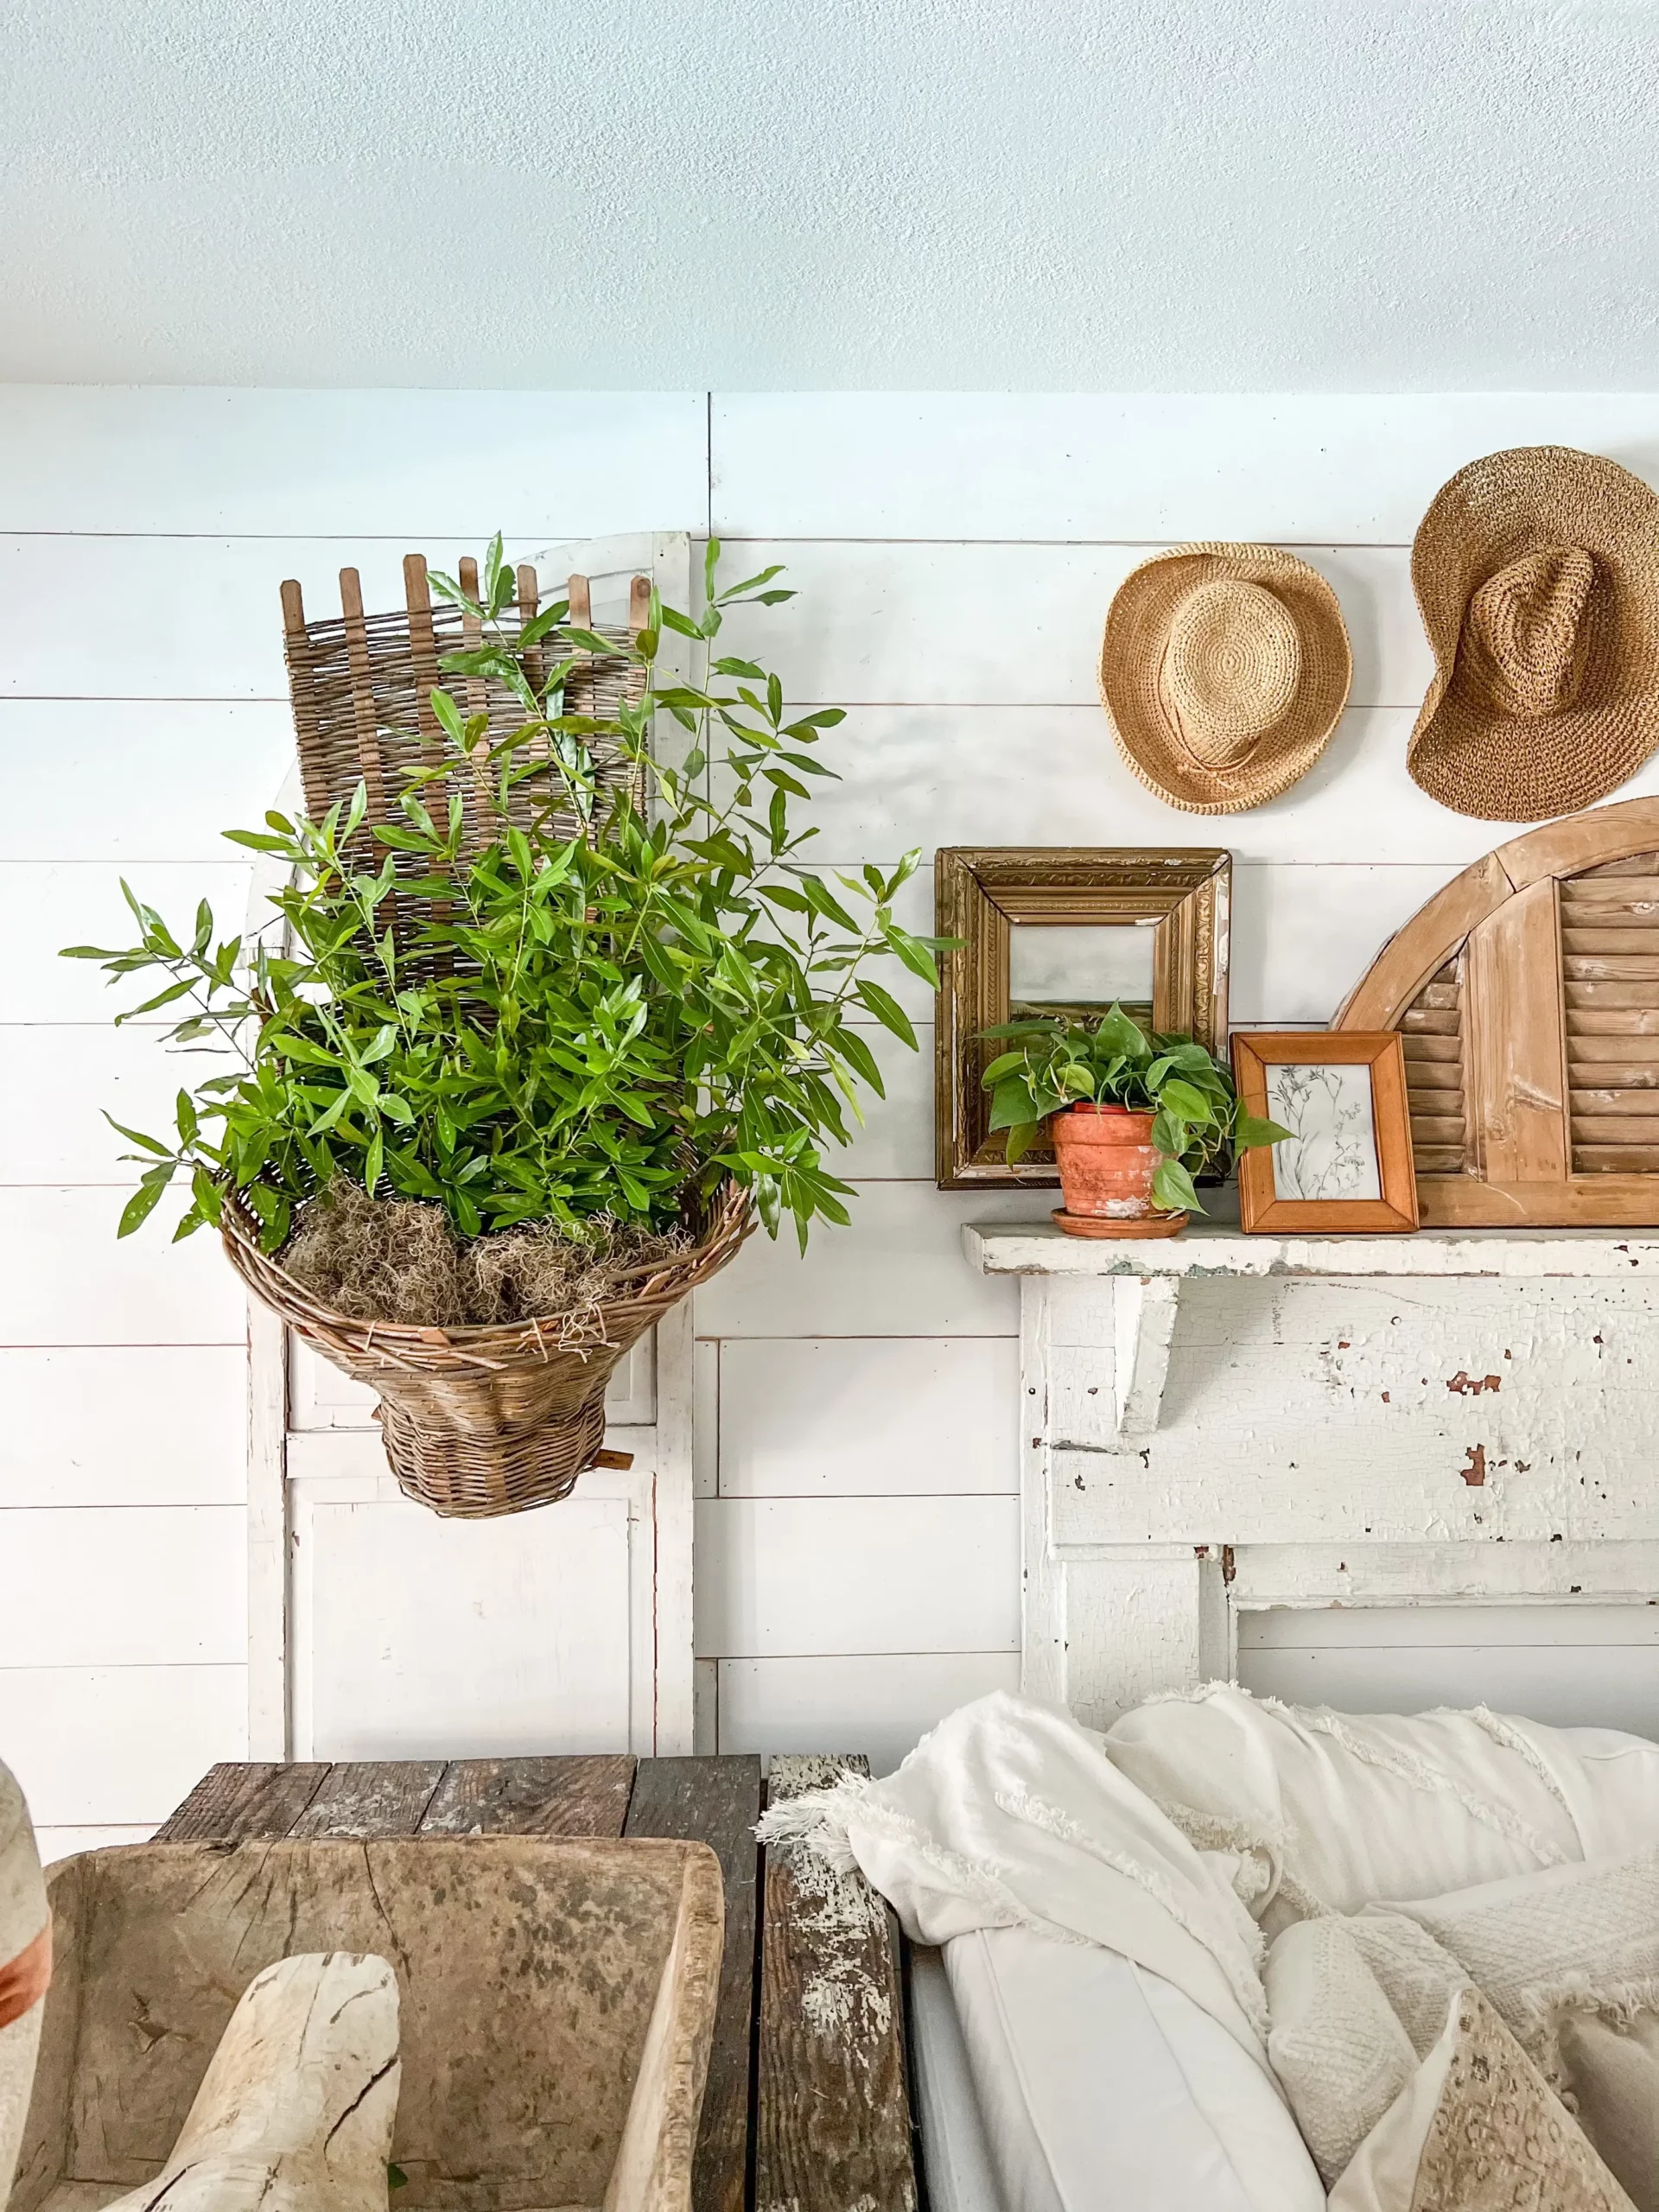 large basket hanging on the wall with the gallery wall holding fresh greenery